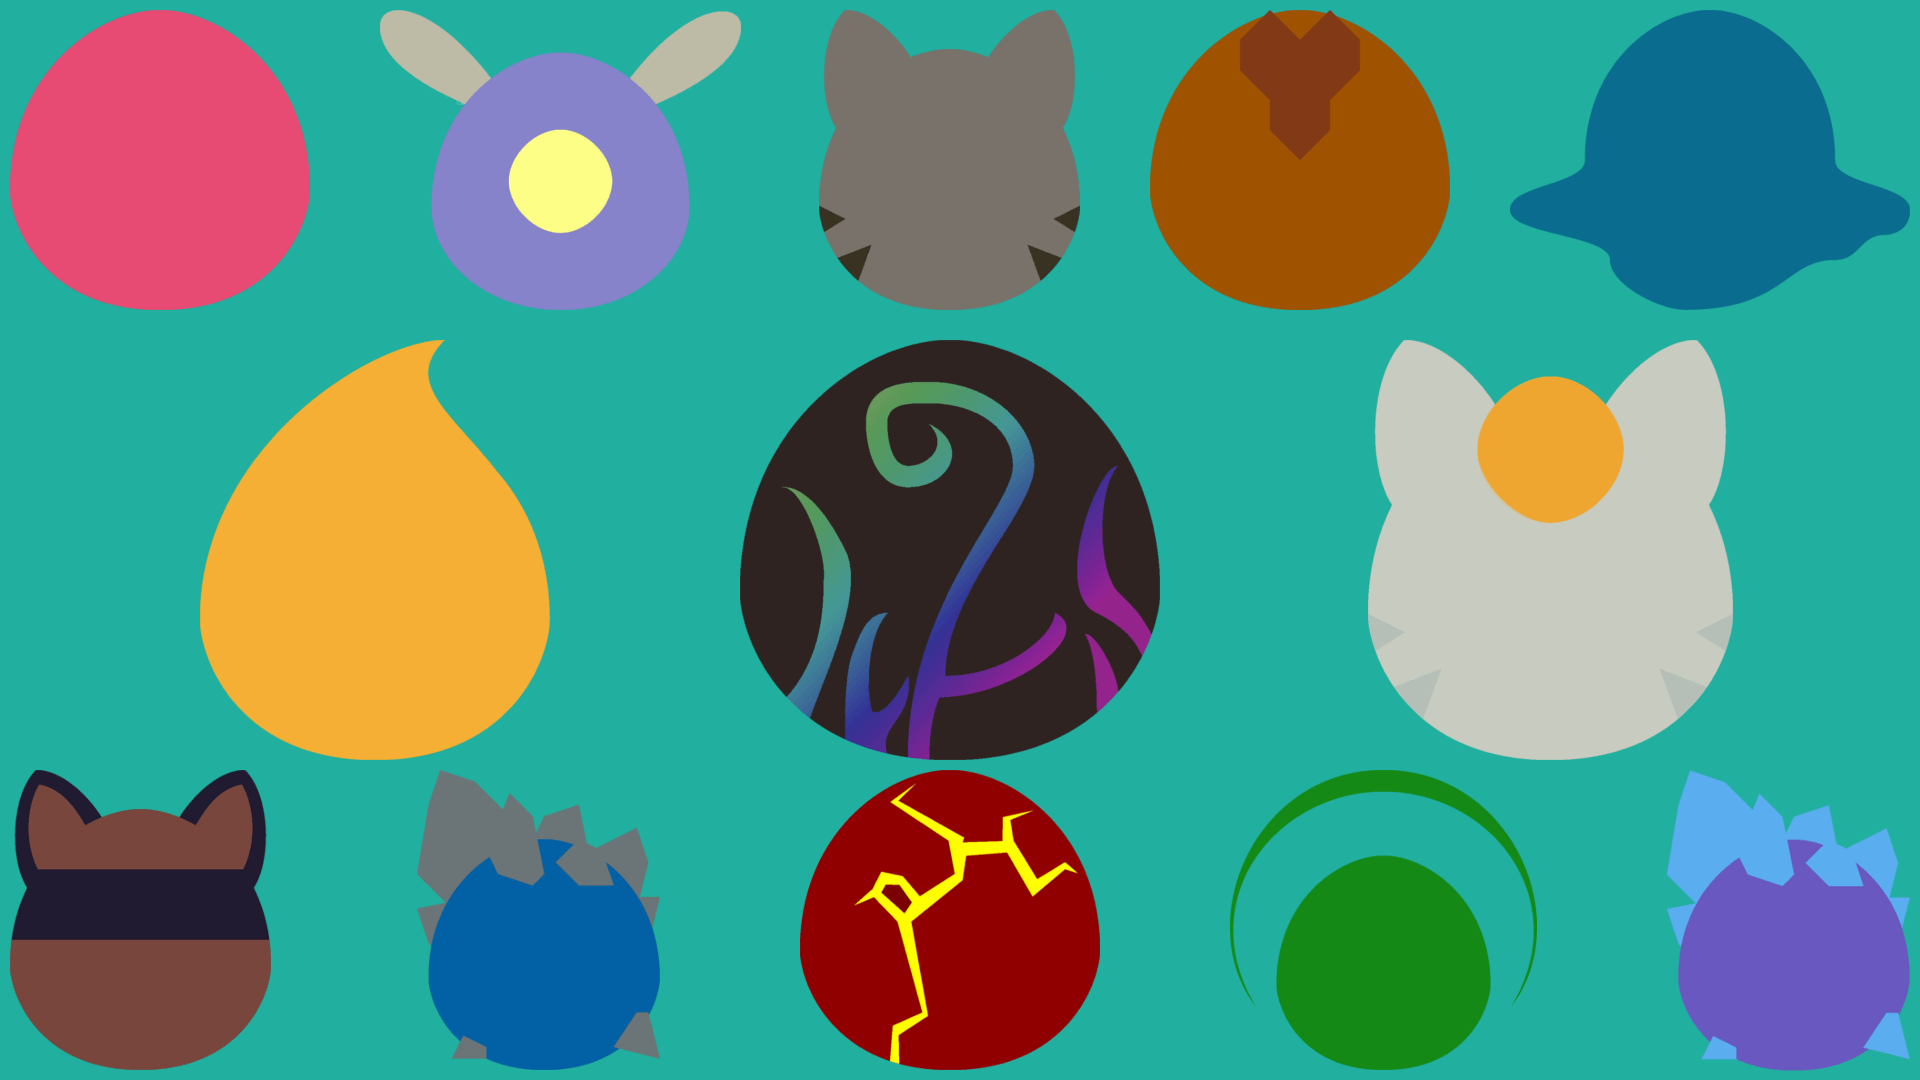 I made a minimalist slime rancher wallpaper, tell me your thoughts